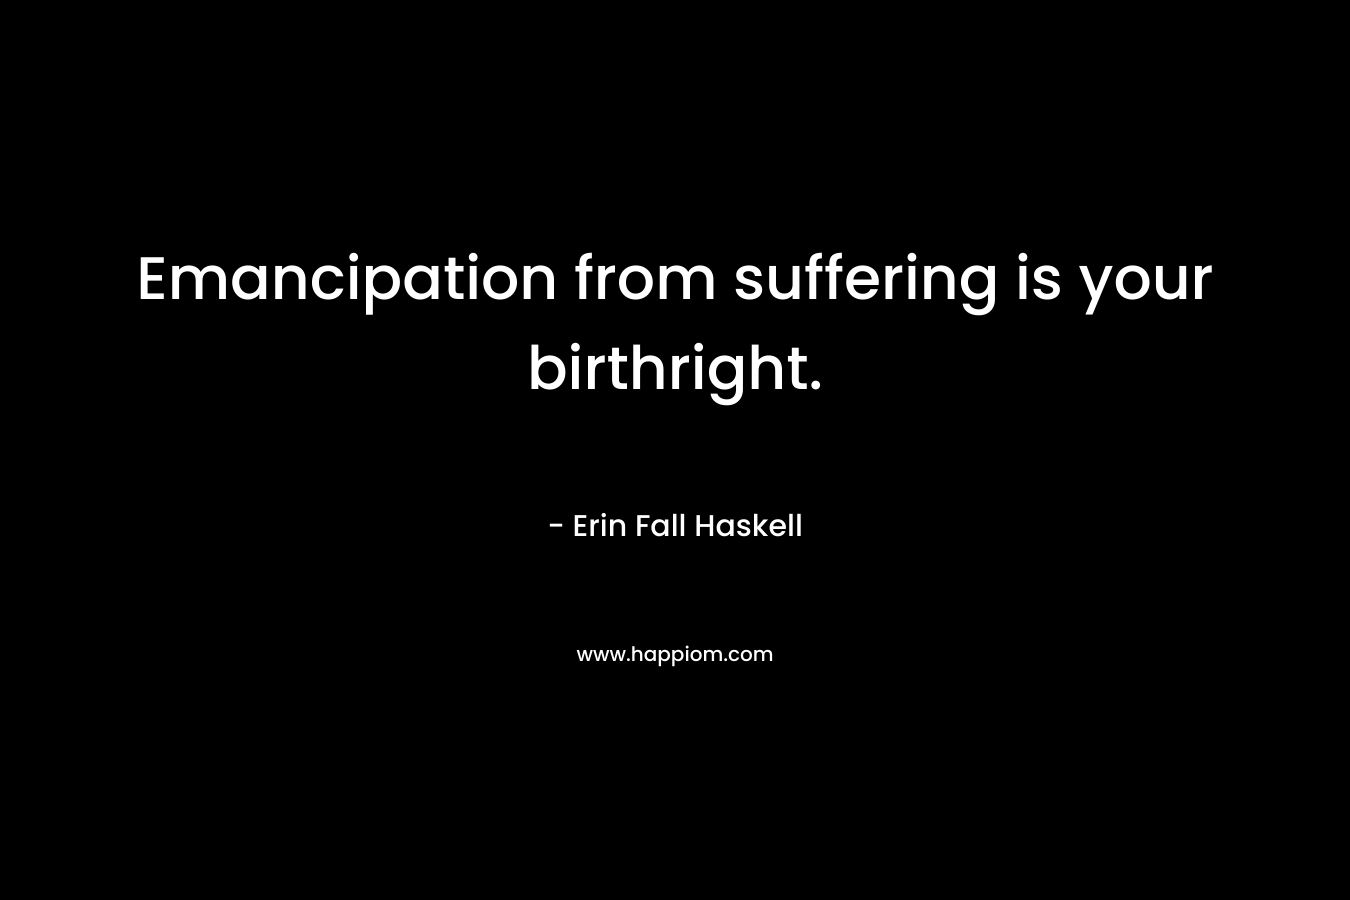 Emancipation from suffering is your birthright. – Erin Fall Haskell